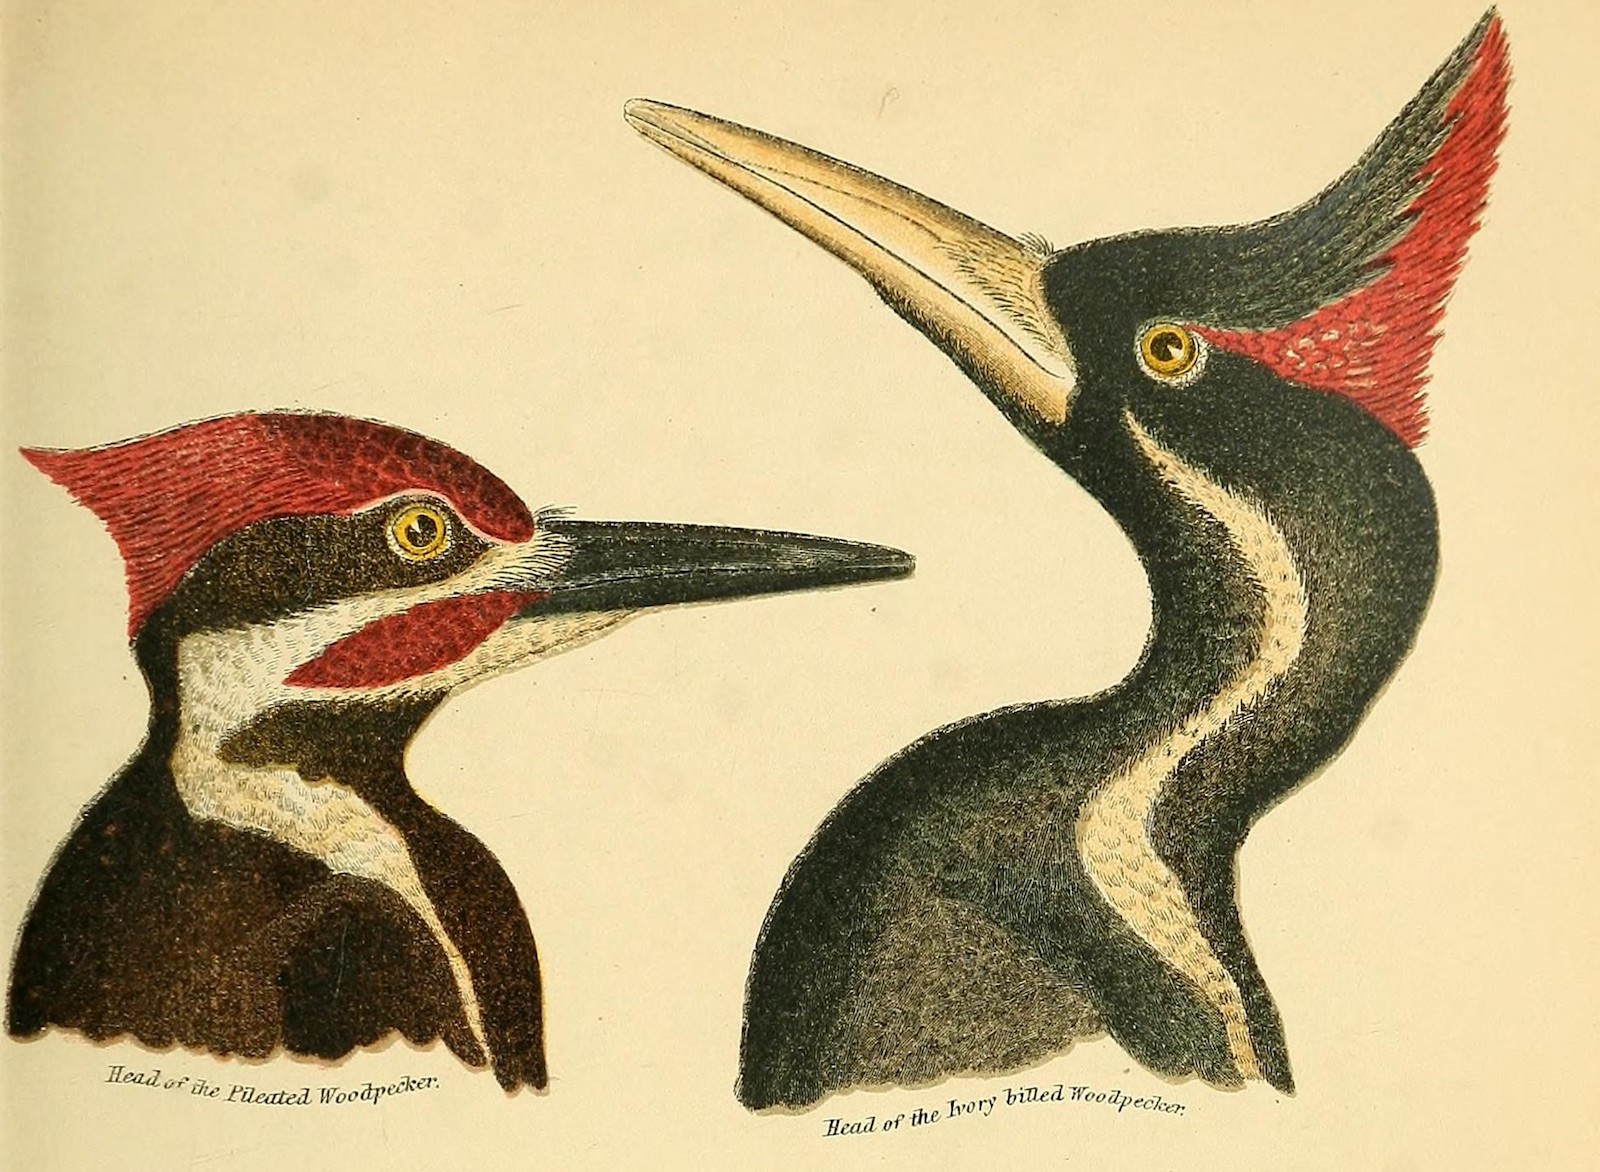 colored illustrations of two bird heads. both birds are red, white, and black, but they have distinctly different features. the bird on the left has a shorter crown of red feathers and a black bill that is shorter. the bird on the right has a much larger beak that is more tan in color. it also has a more pronounced pointed red plumage on its crown